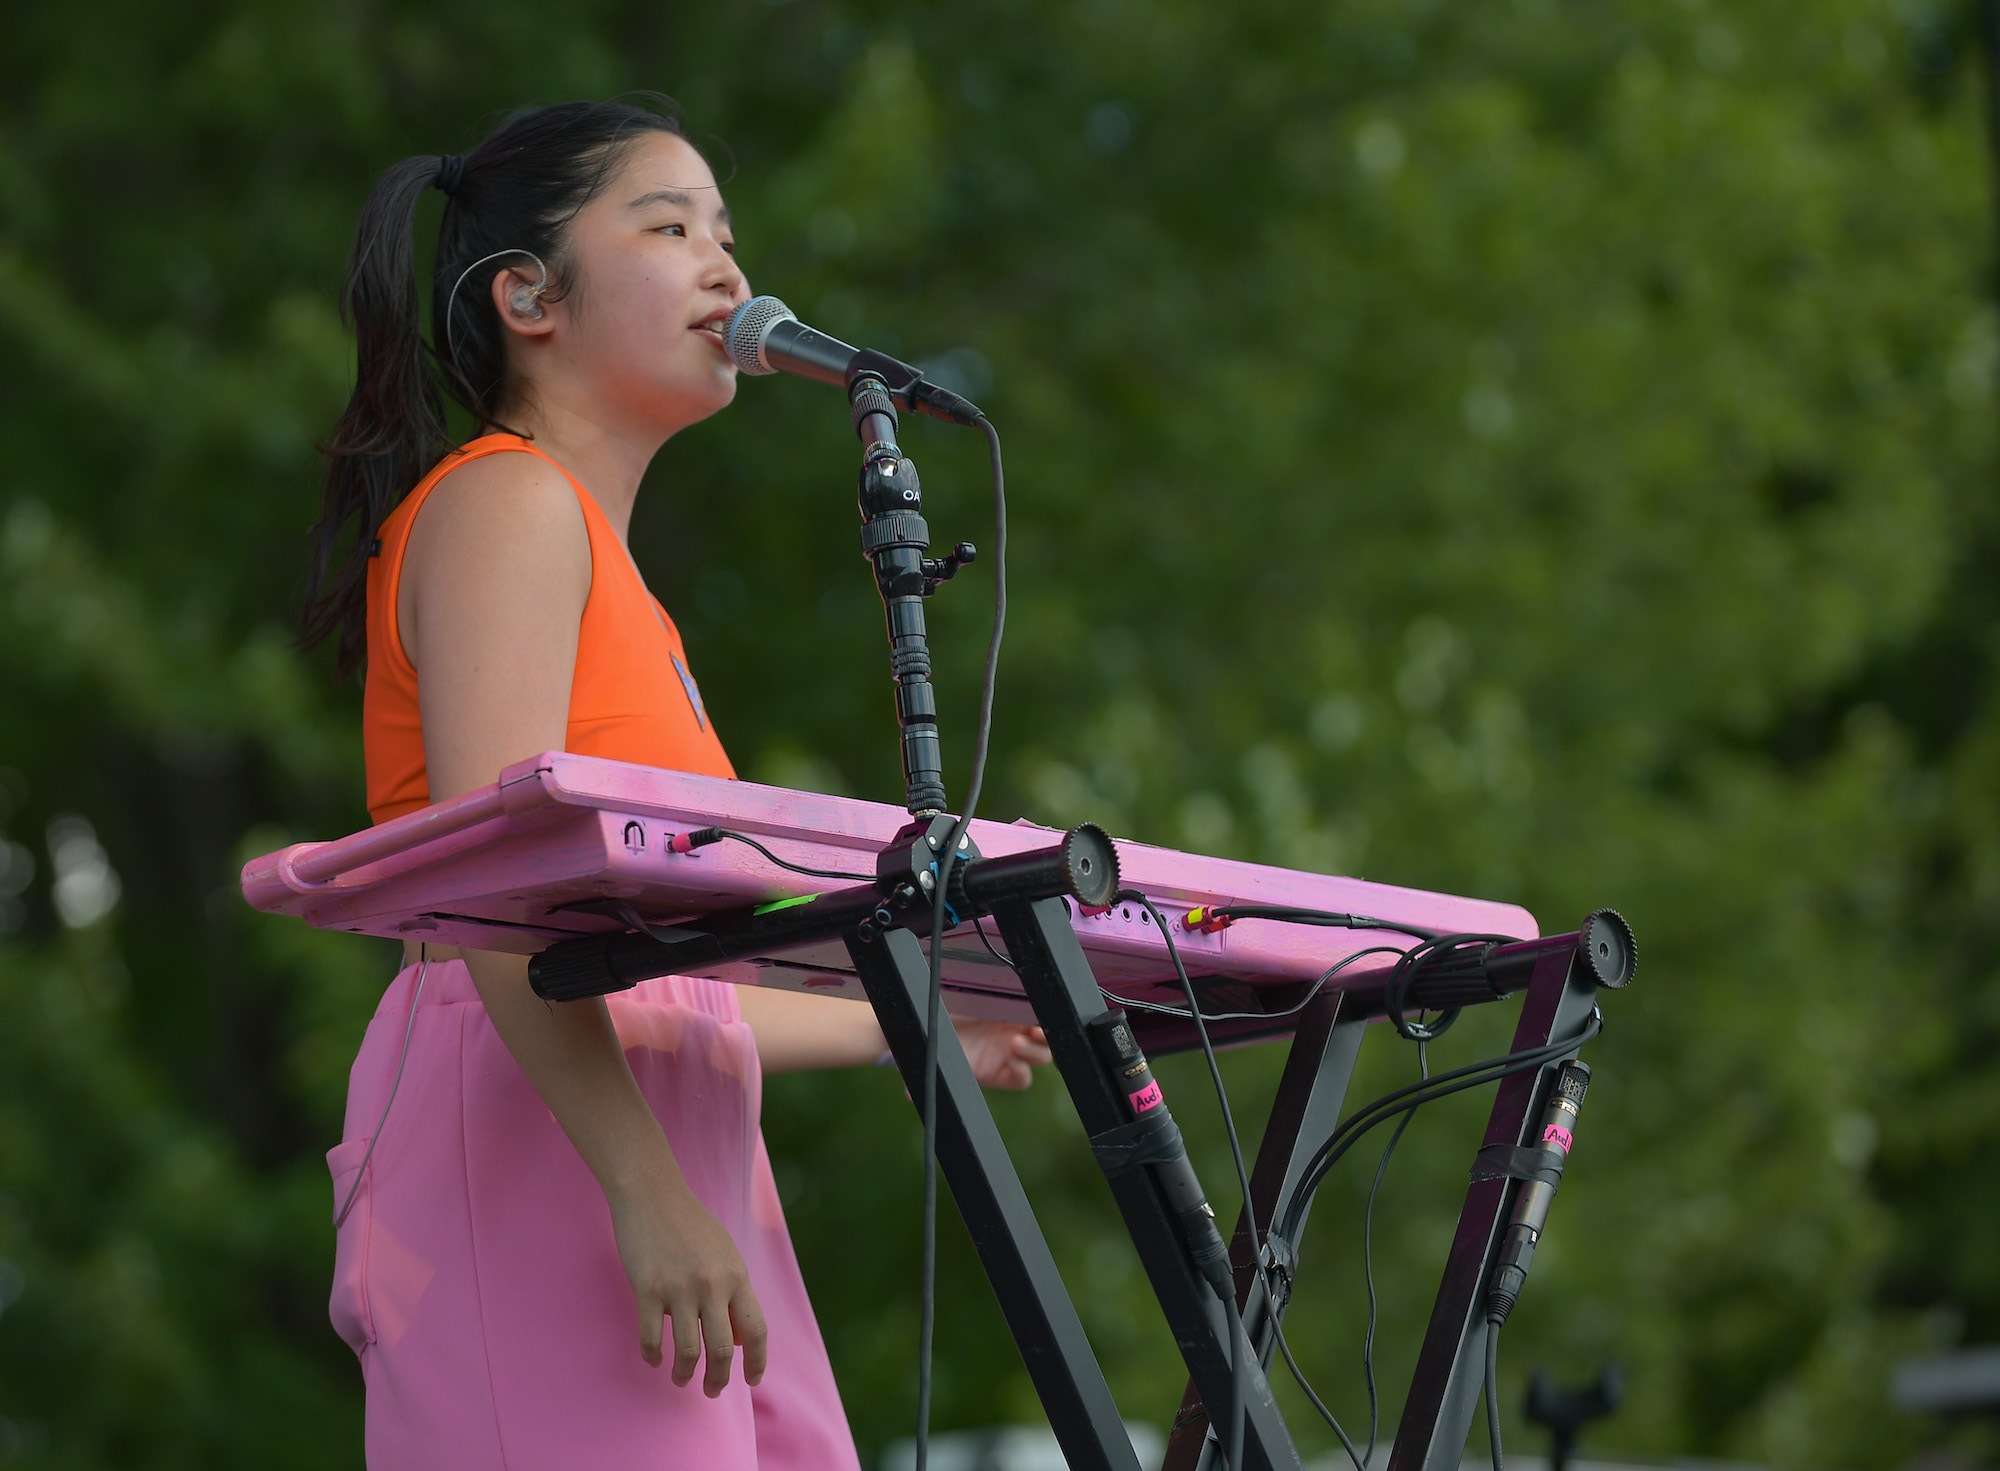 Chai Live at Pitchfork [GALLERY] 8